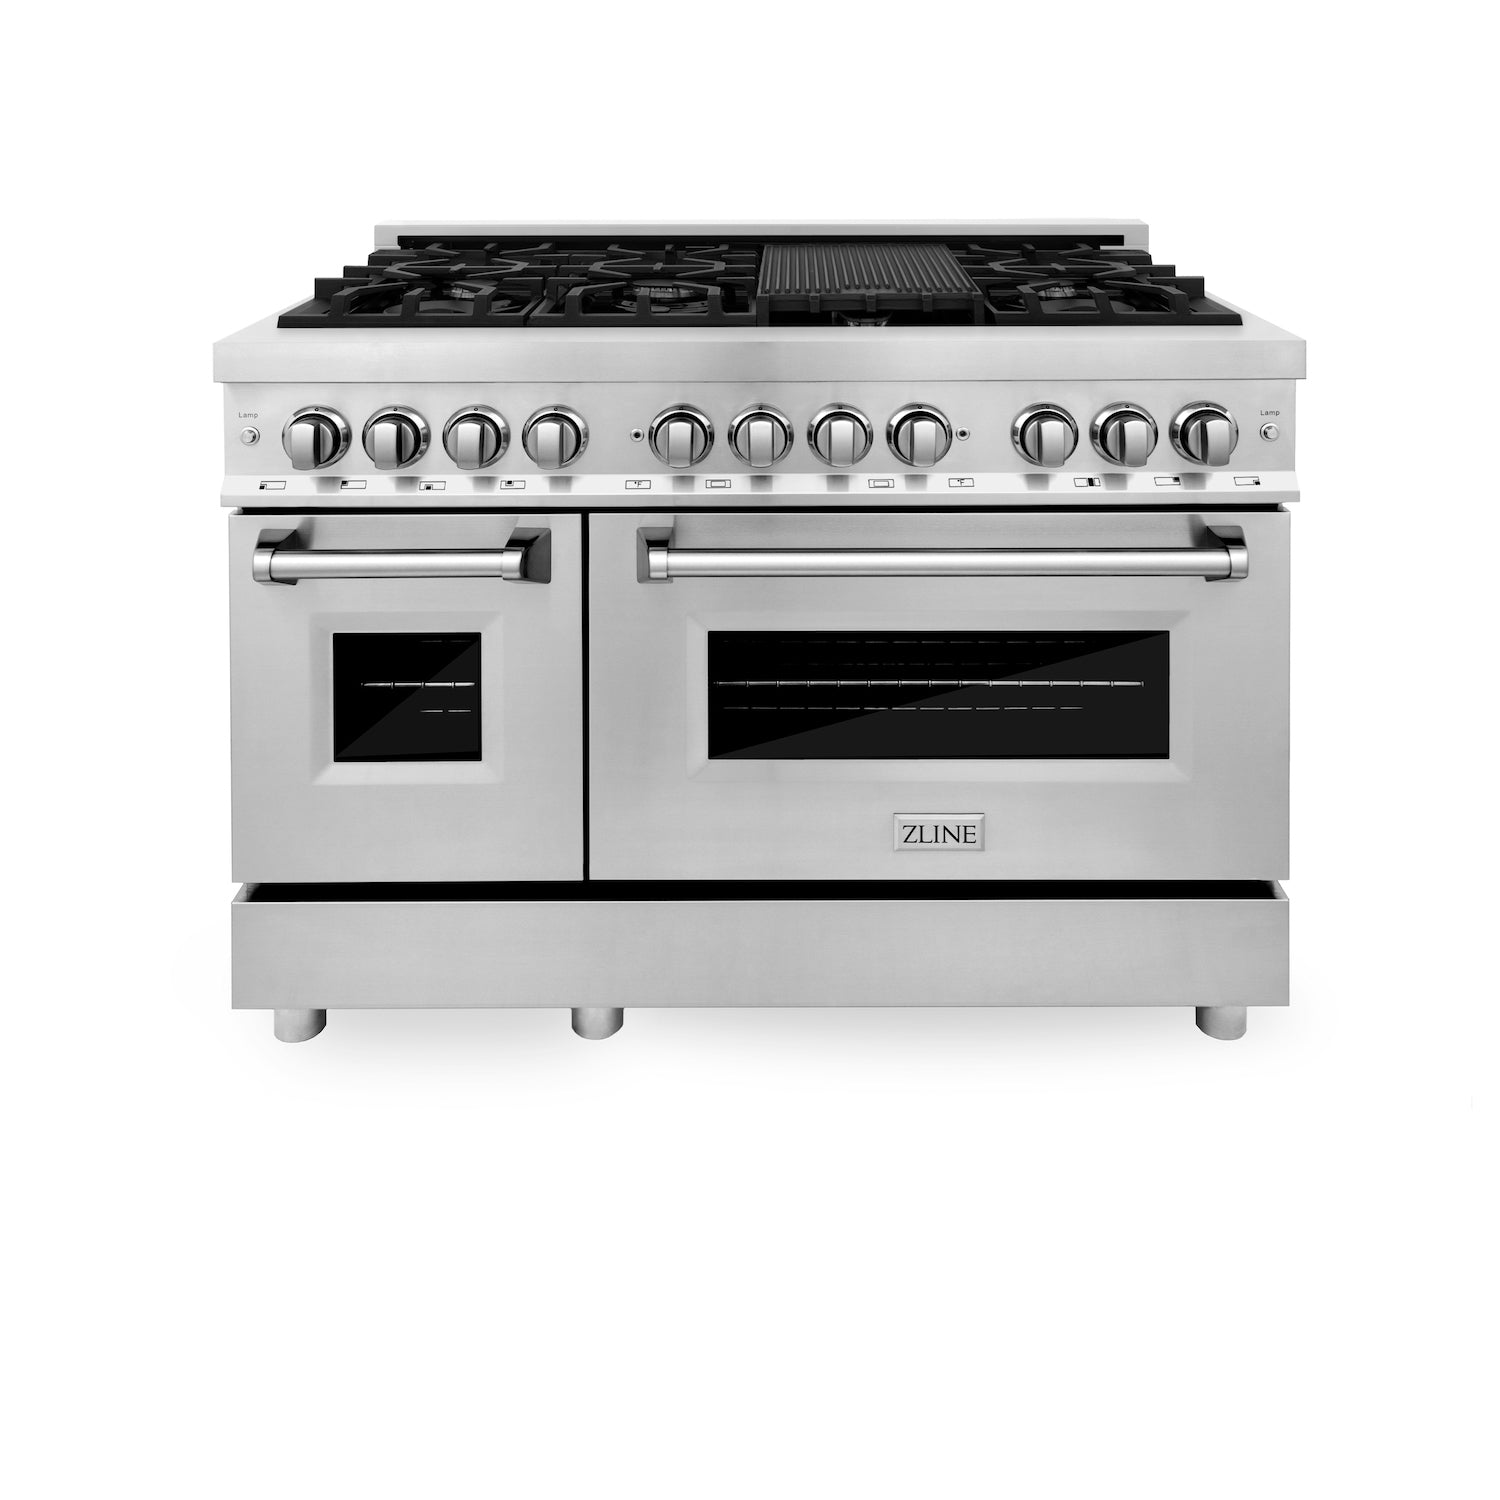 ZLINE 48" 6.0 cu. ft. Dual Fuel Range with Gas Stove and Electric Oven in Stainless Steel (RA48)